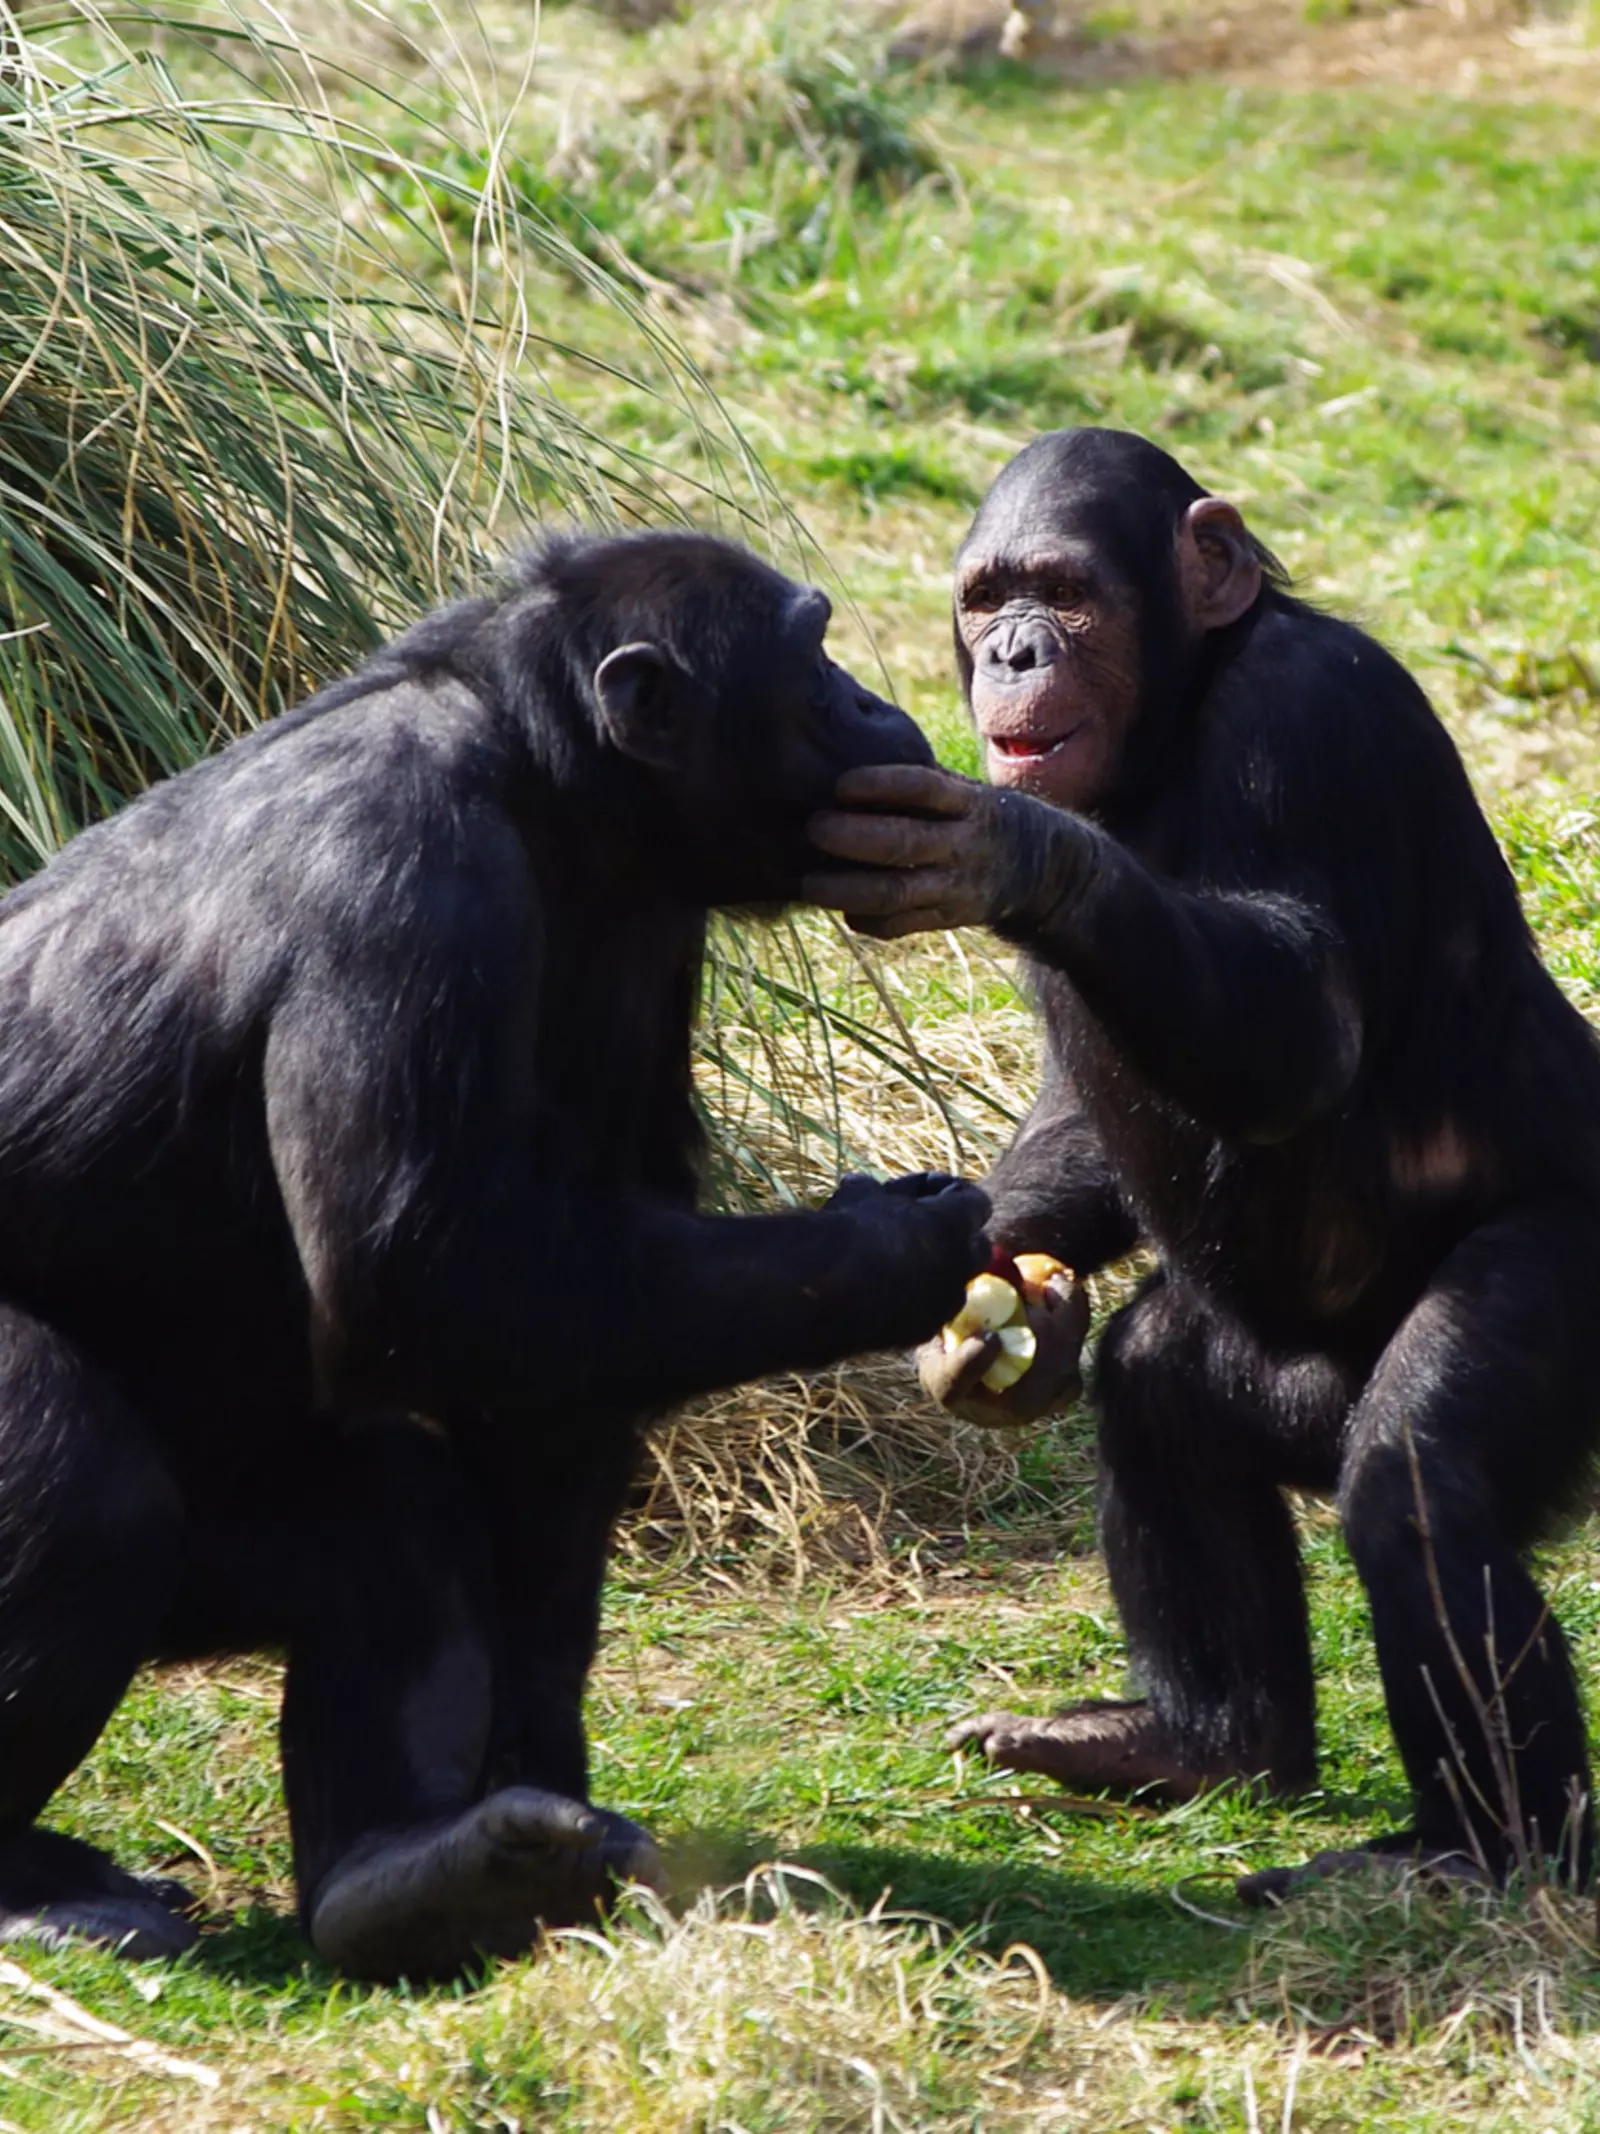 Chimps eating at Whipsnade Zoo